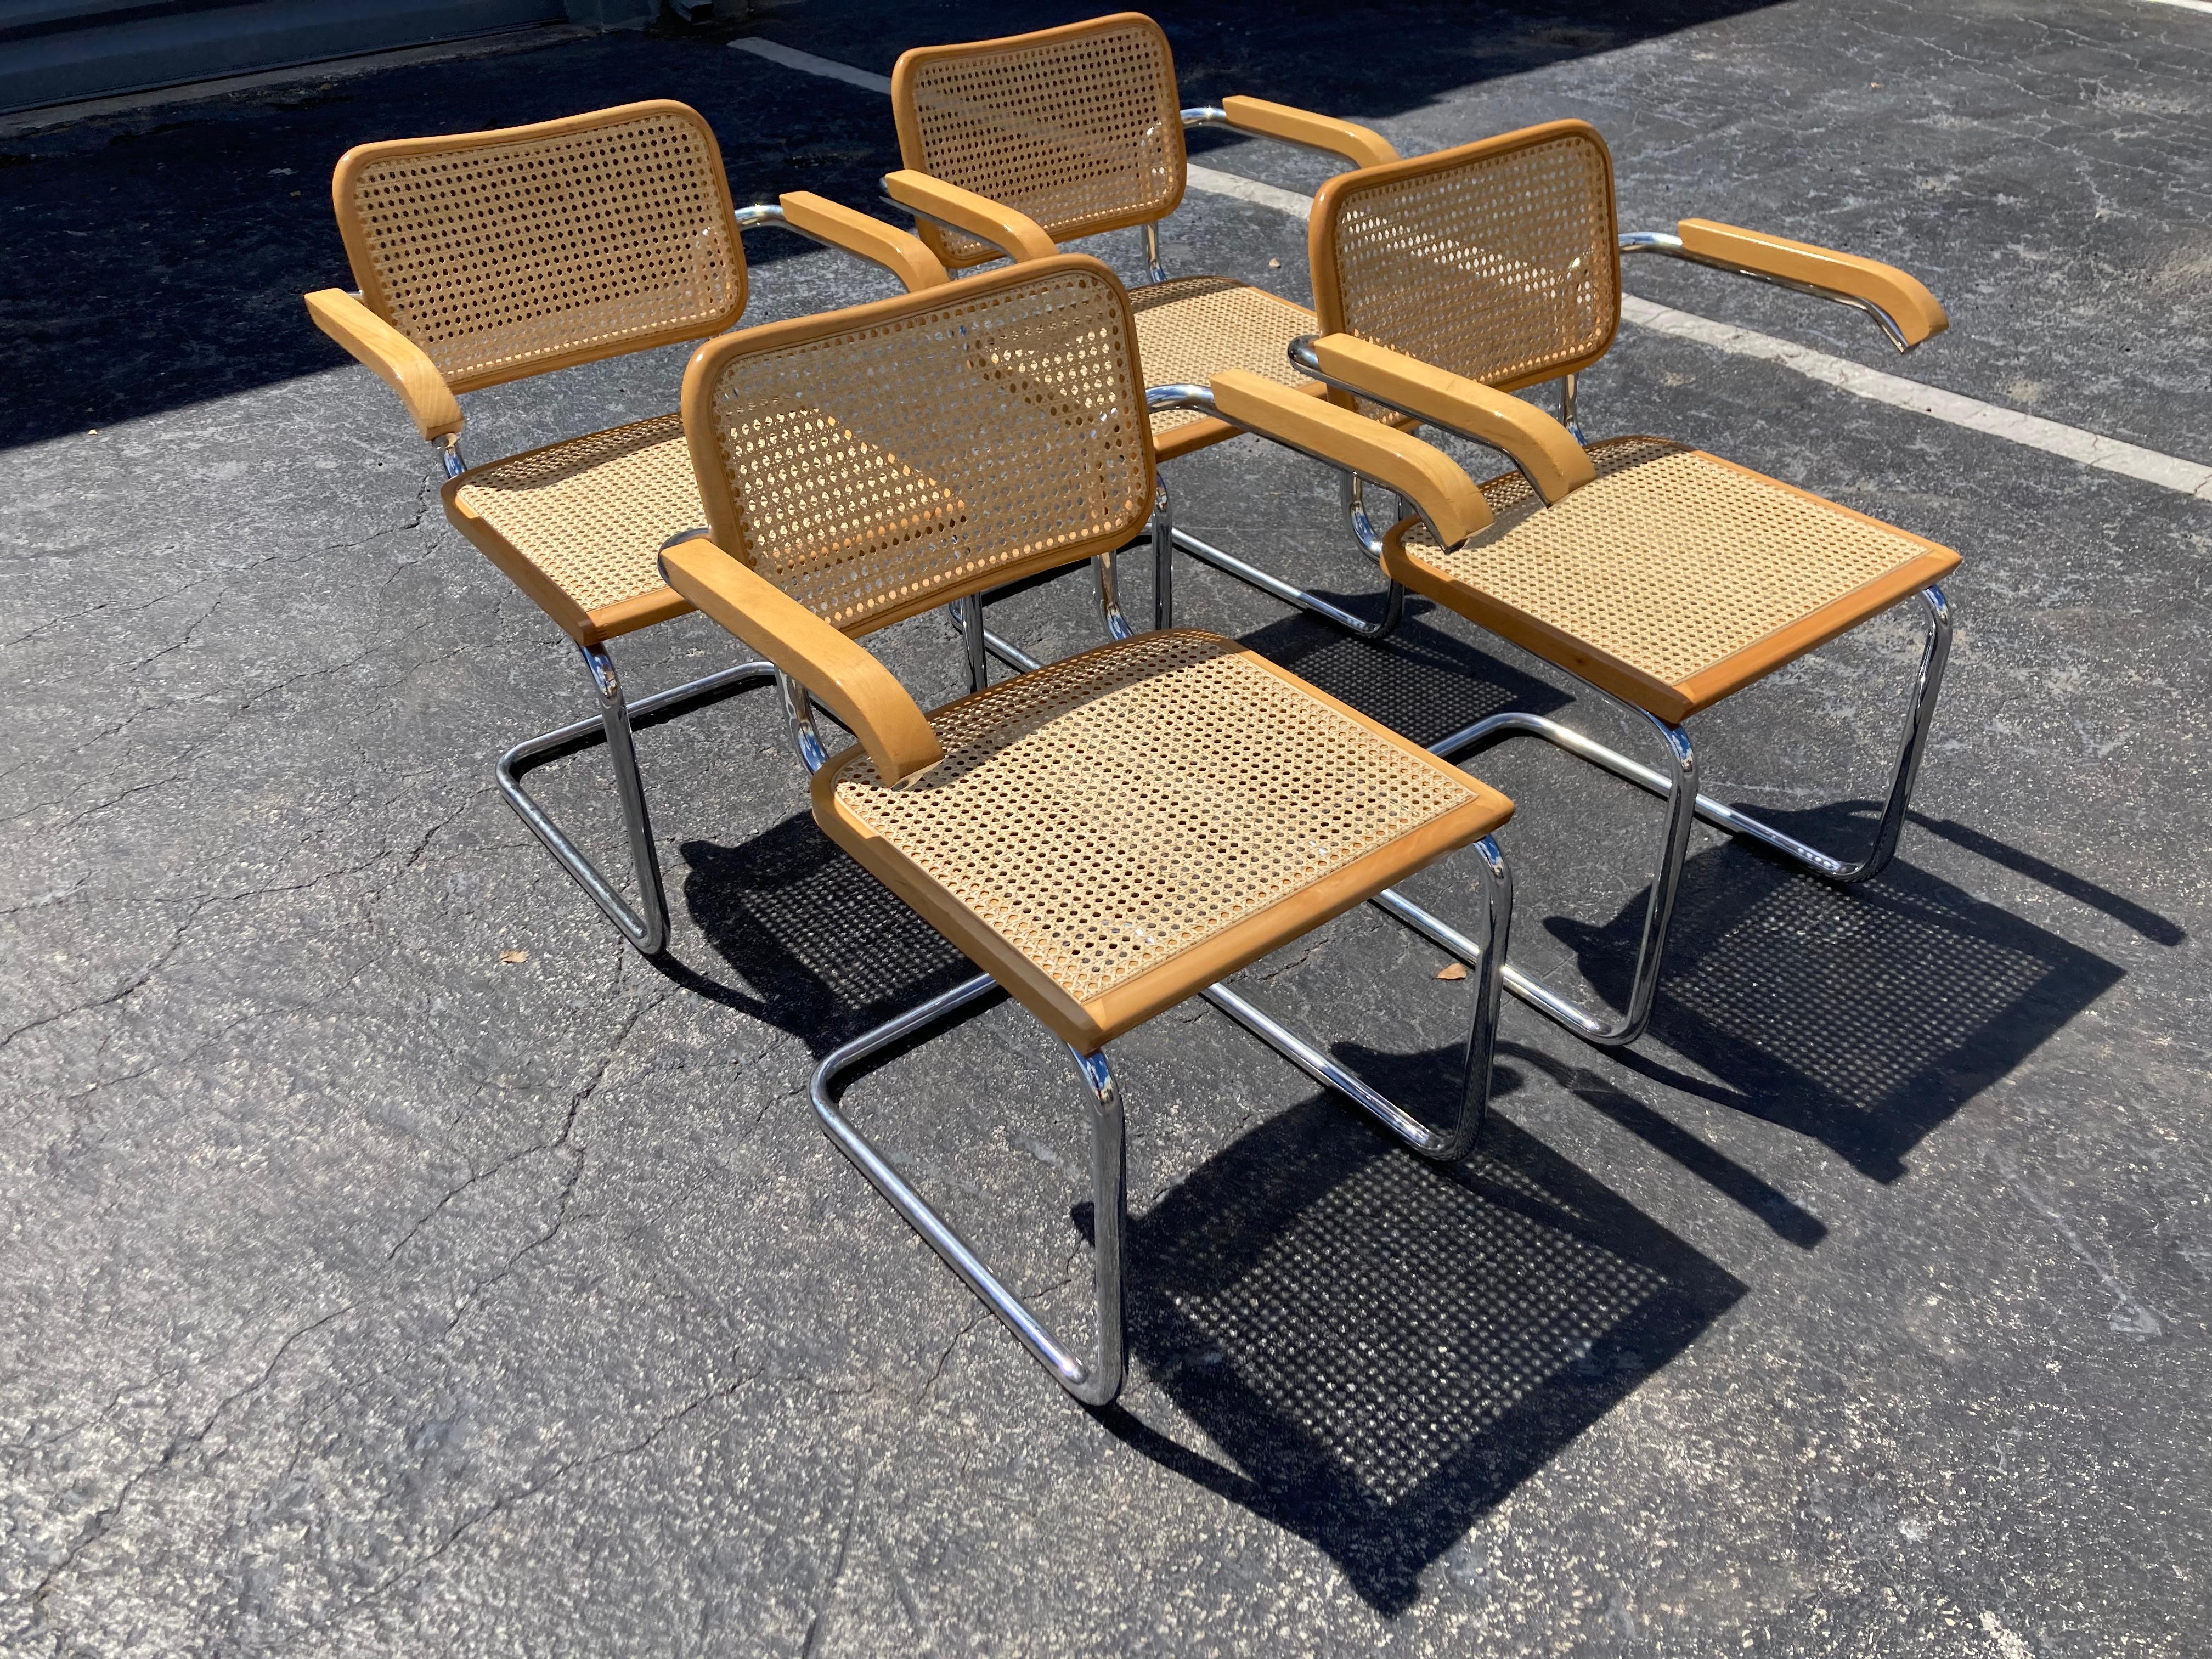 Set of four Marcel Breuer cesca chairs, made in Italy. Measures : Front arm height is 27”. 
Good used condition with some scratches and nicks.